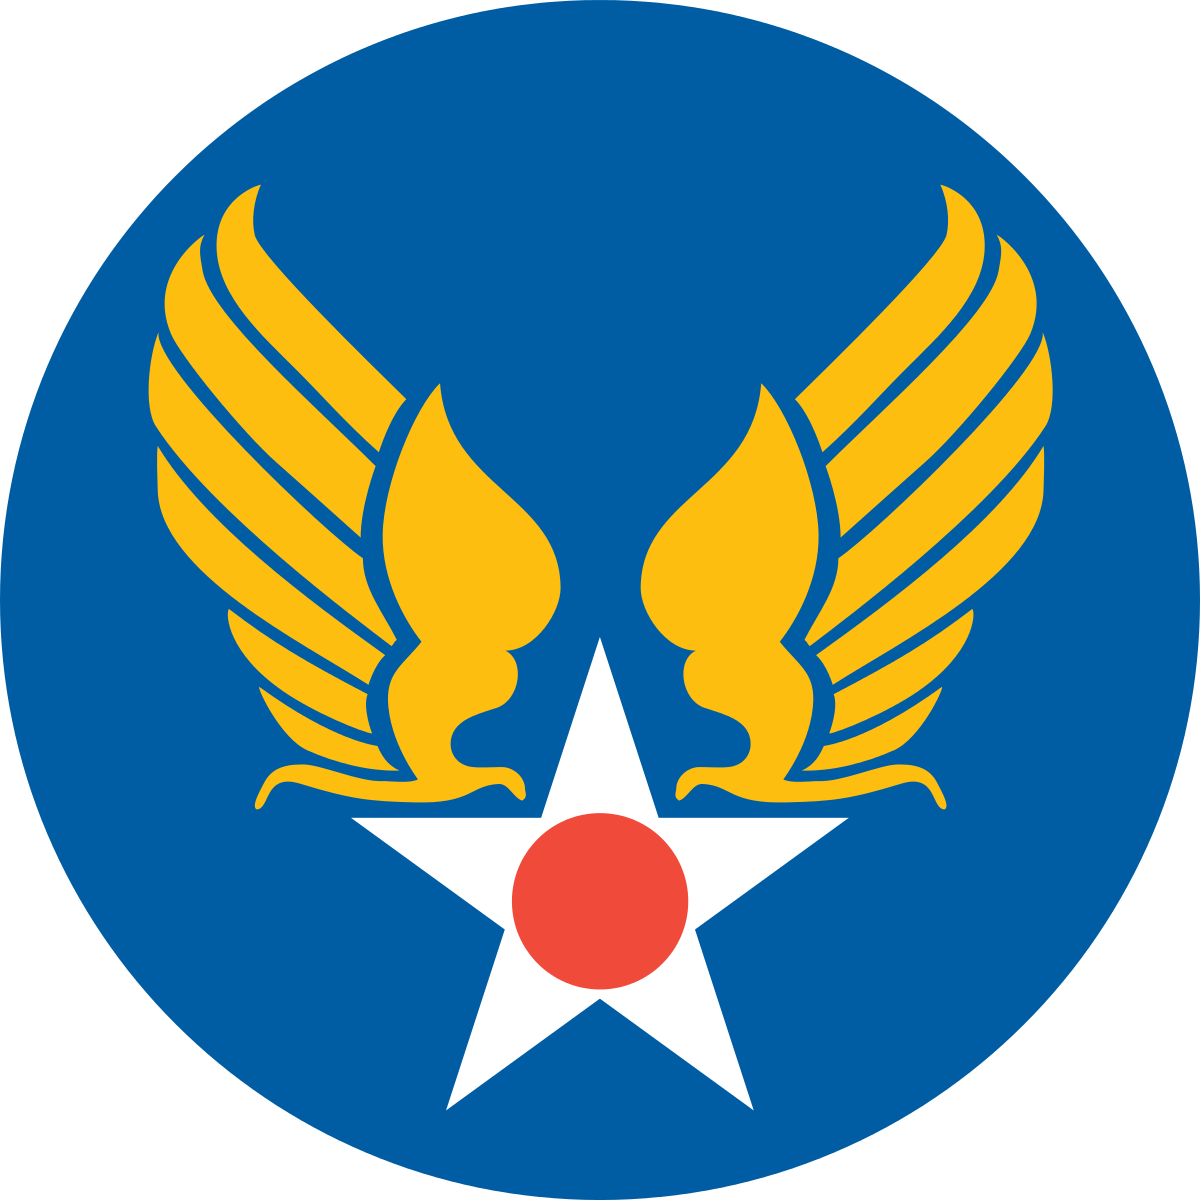 United States Army Air Forces.